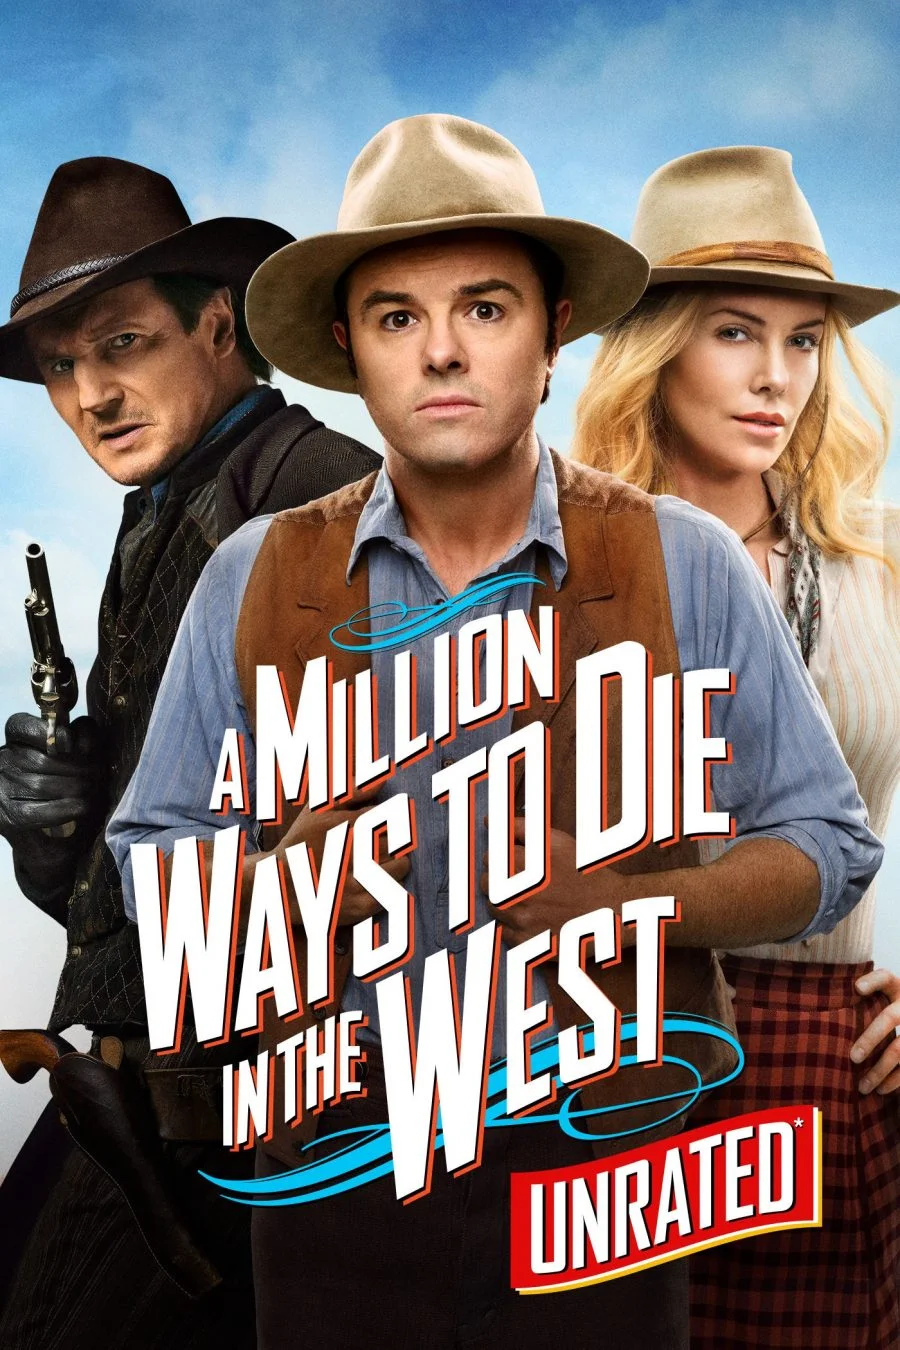 A-Million-Ways-to-Die-In-the-West-filming-locations-poster